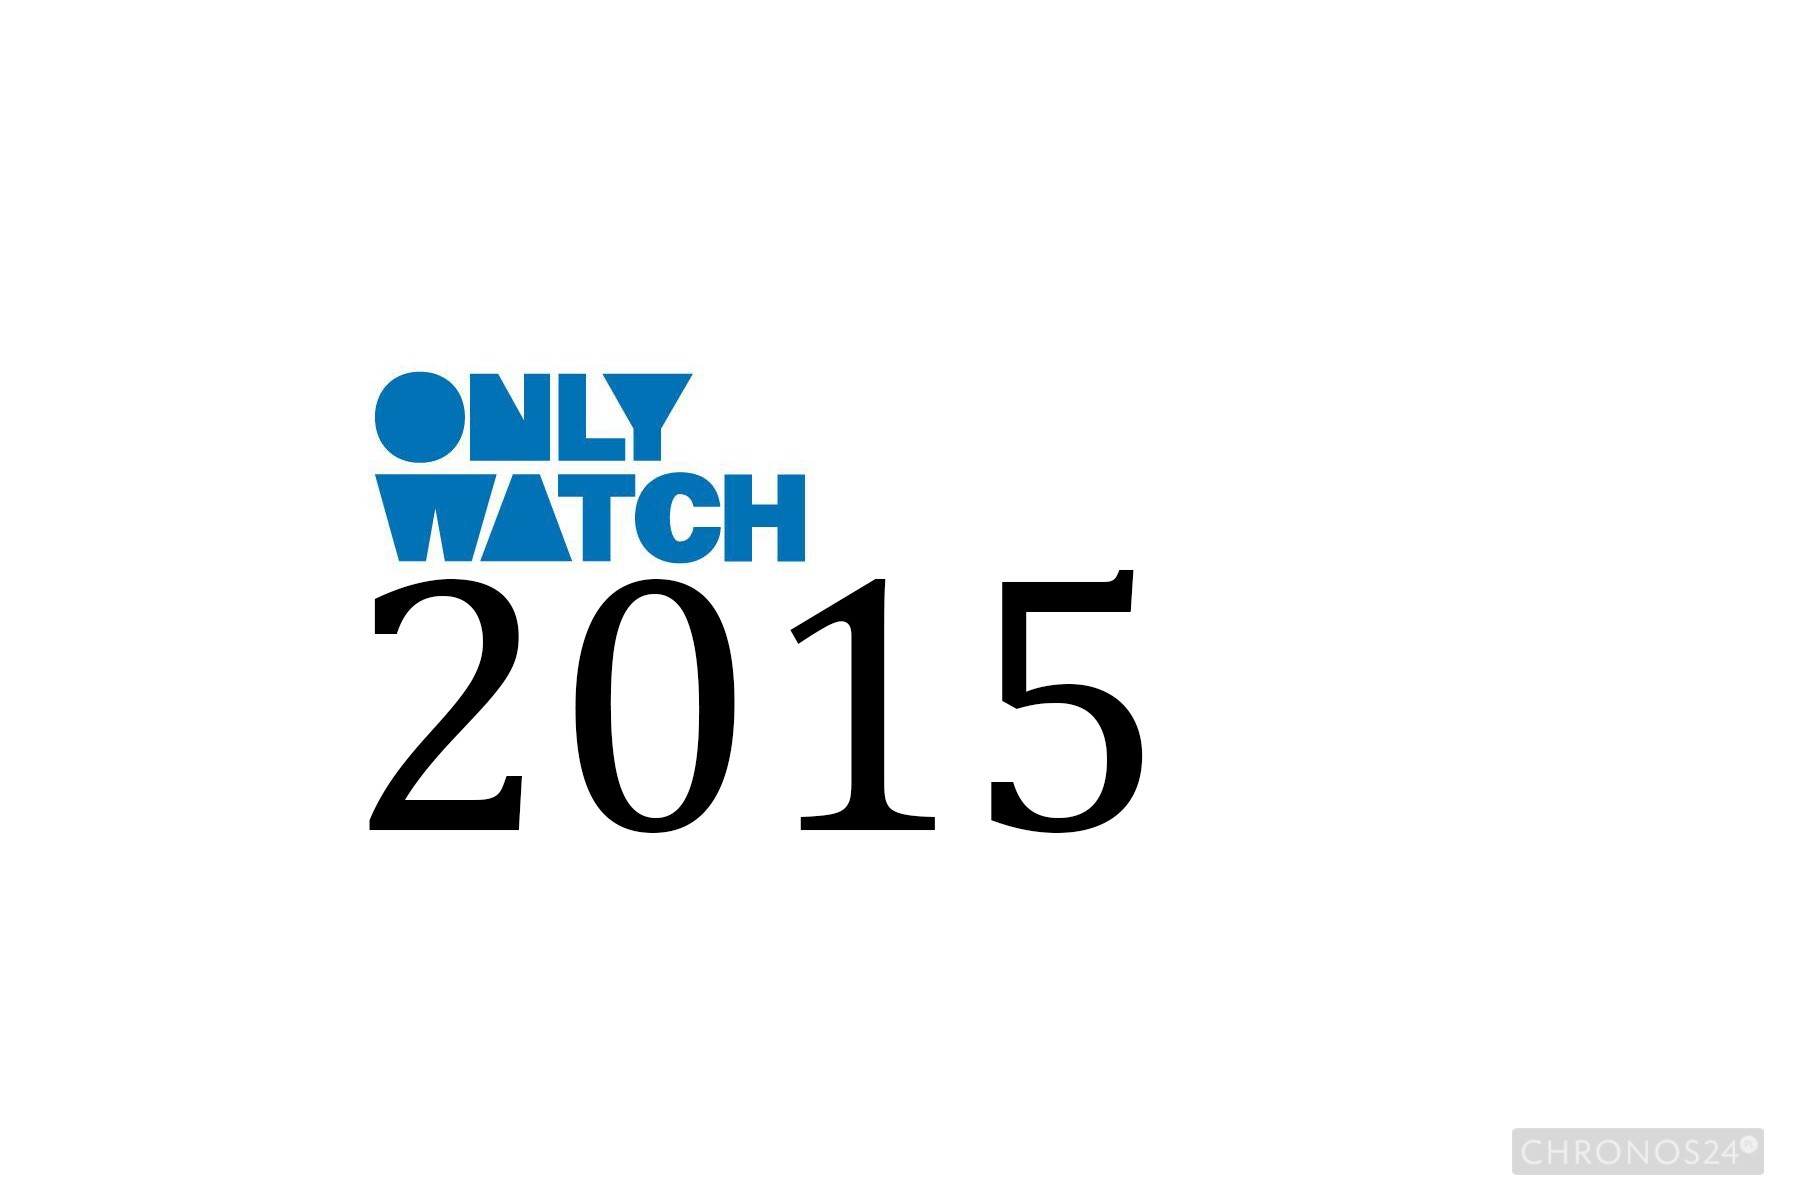 ONLY WATCH 2015